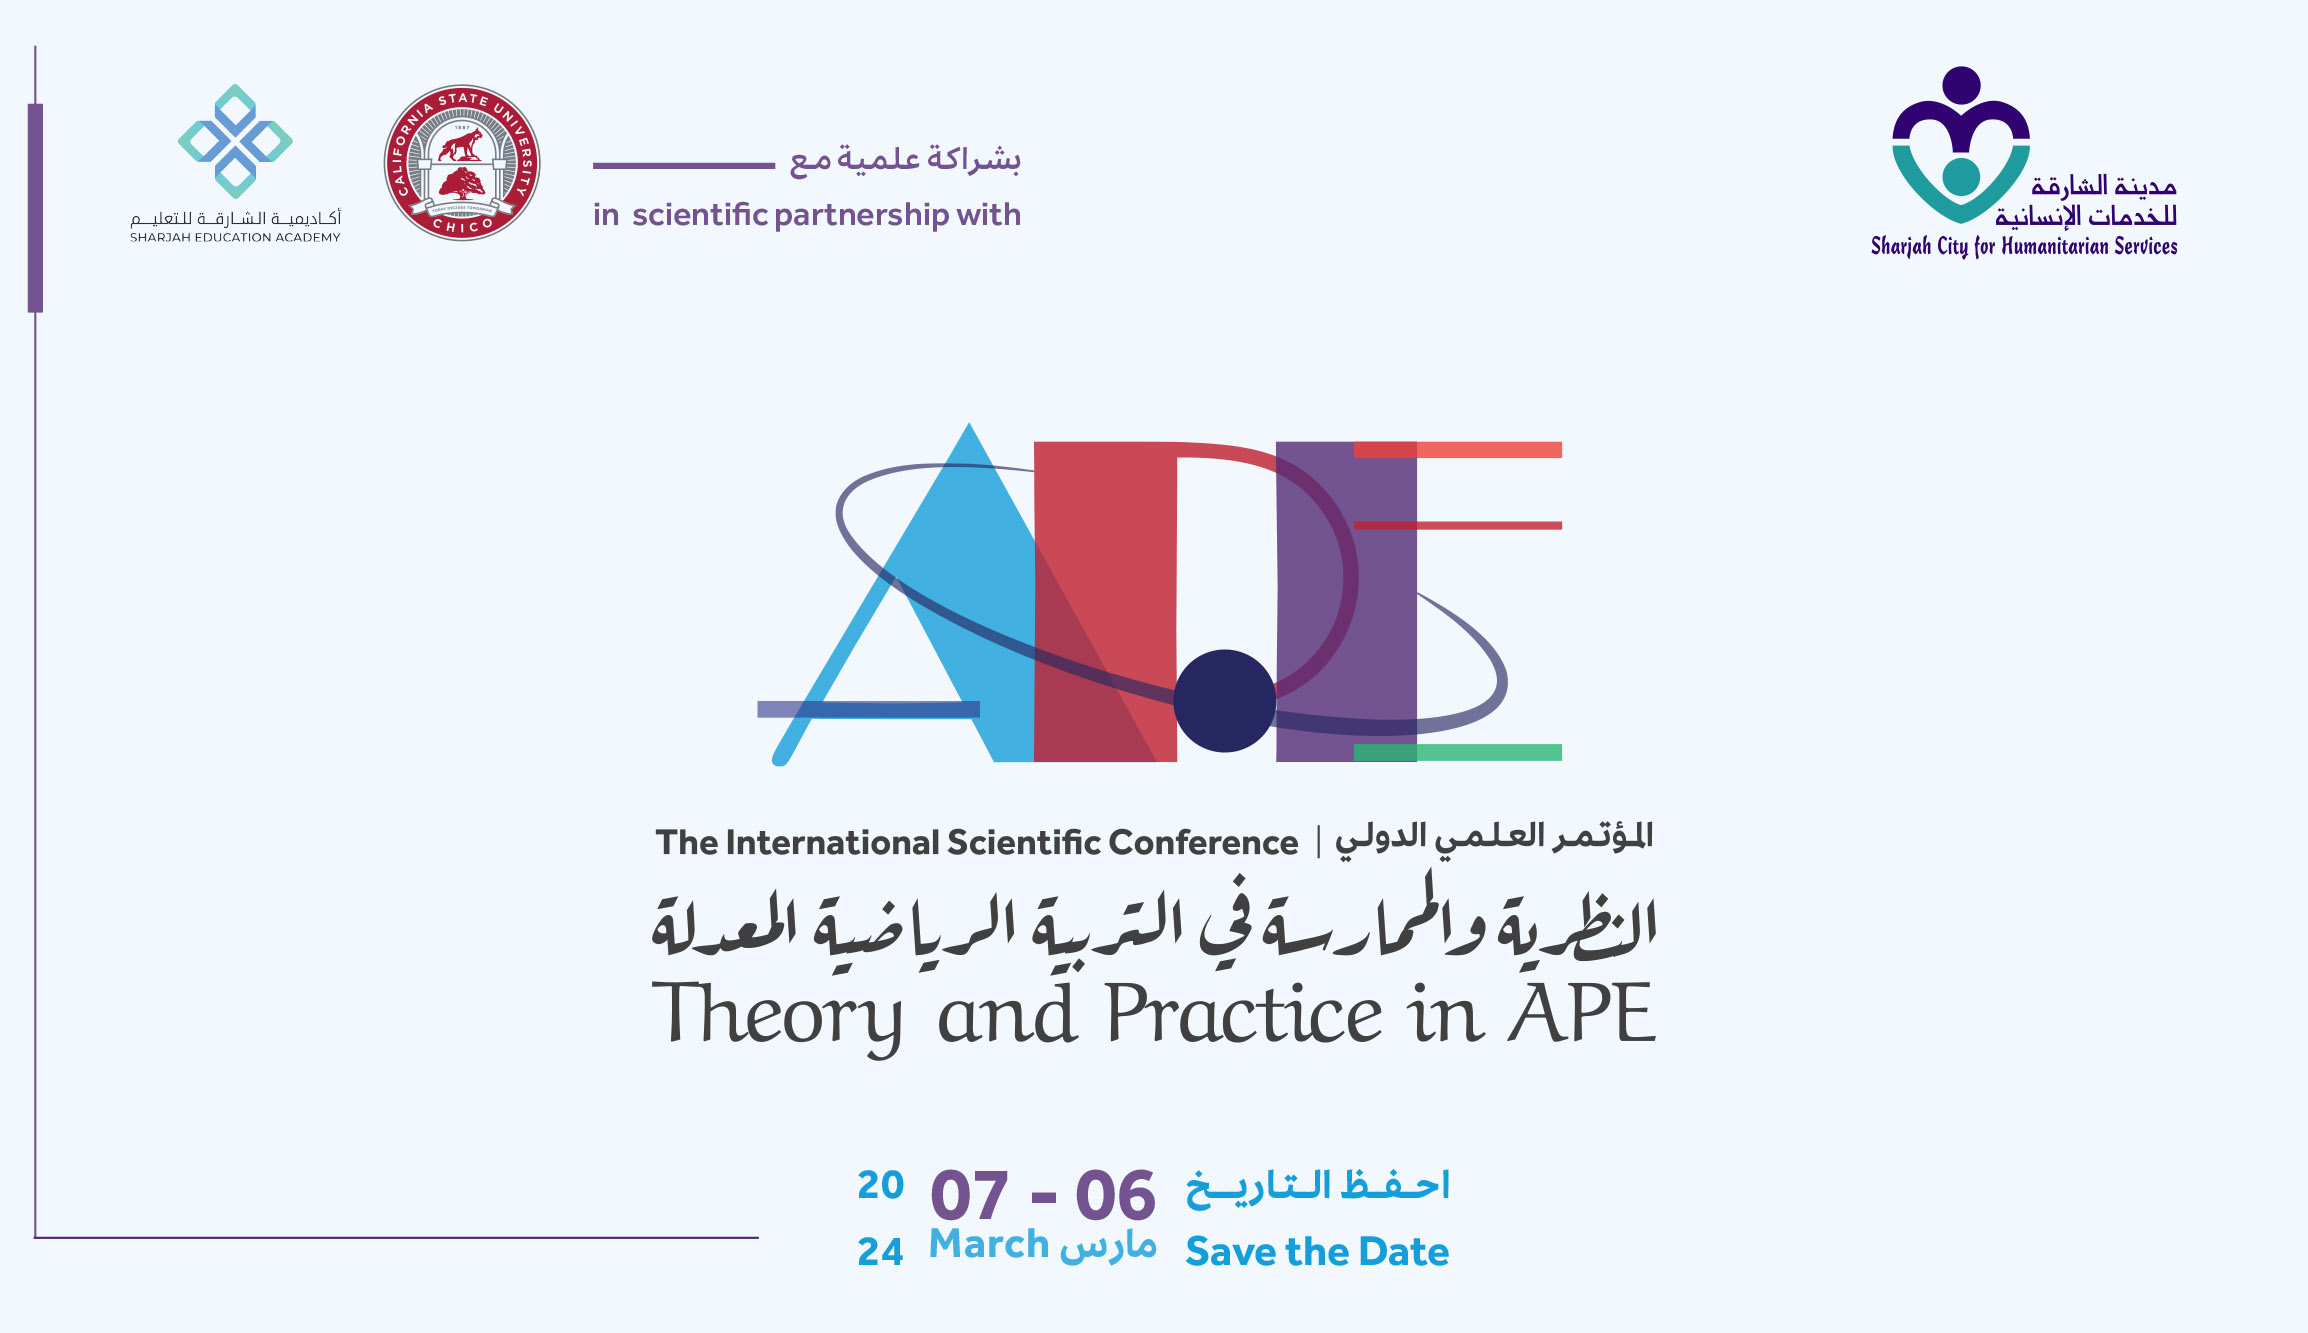 https://www.schs.ae/ar/event-detail/Tveory-And-Practice-In-APETheoryAPE